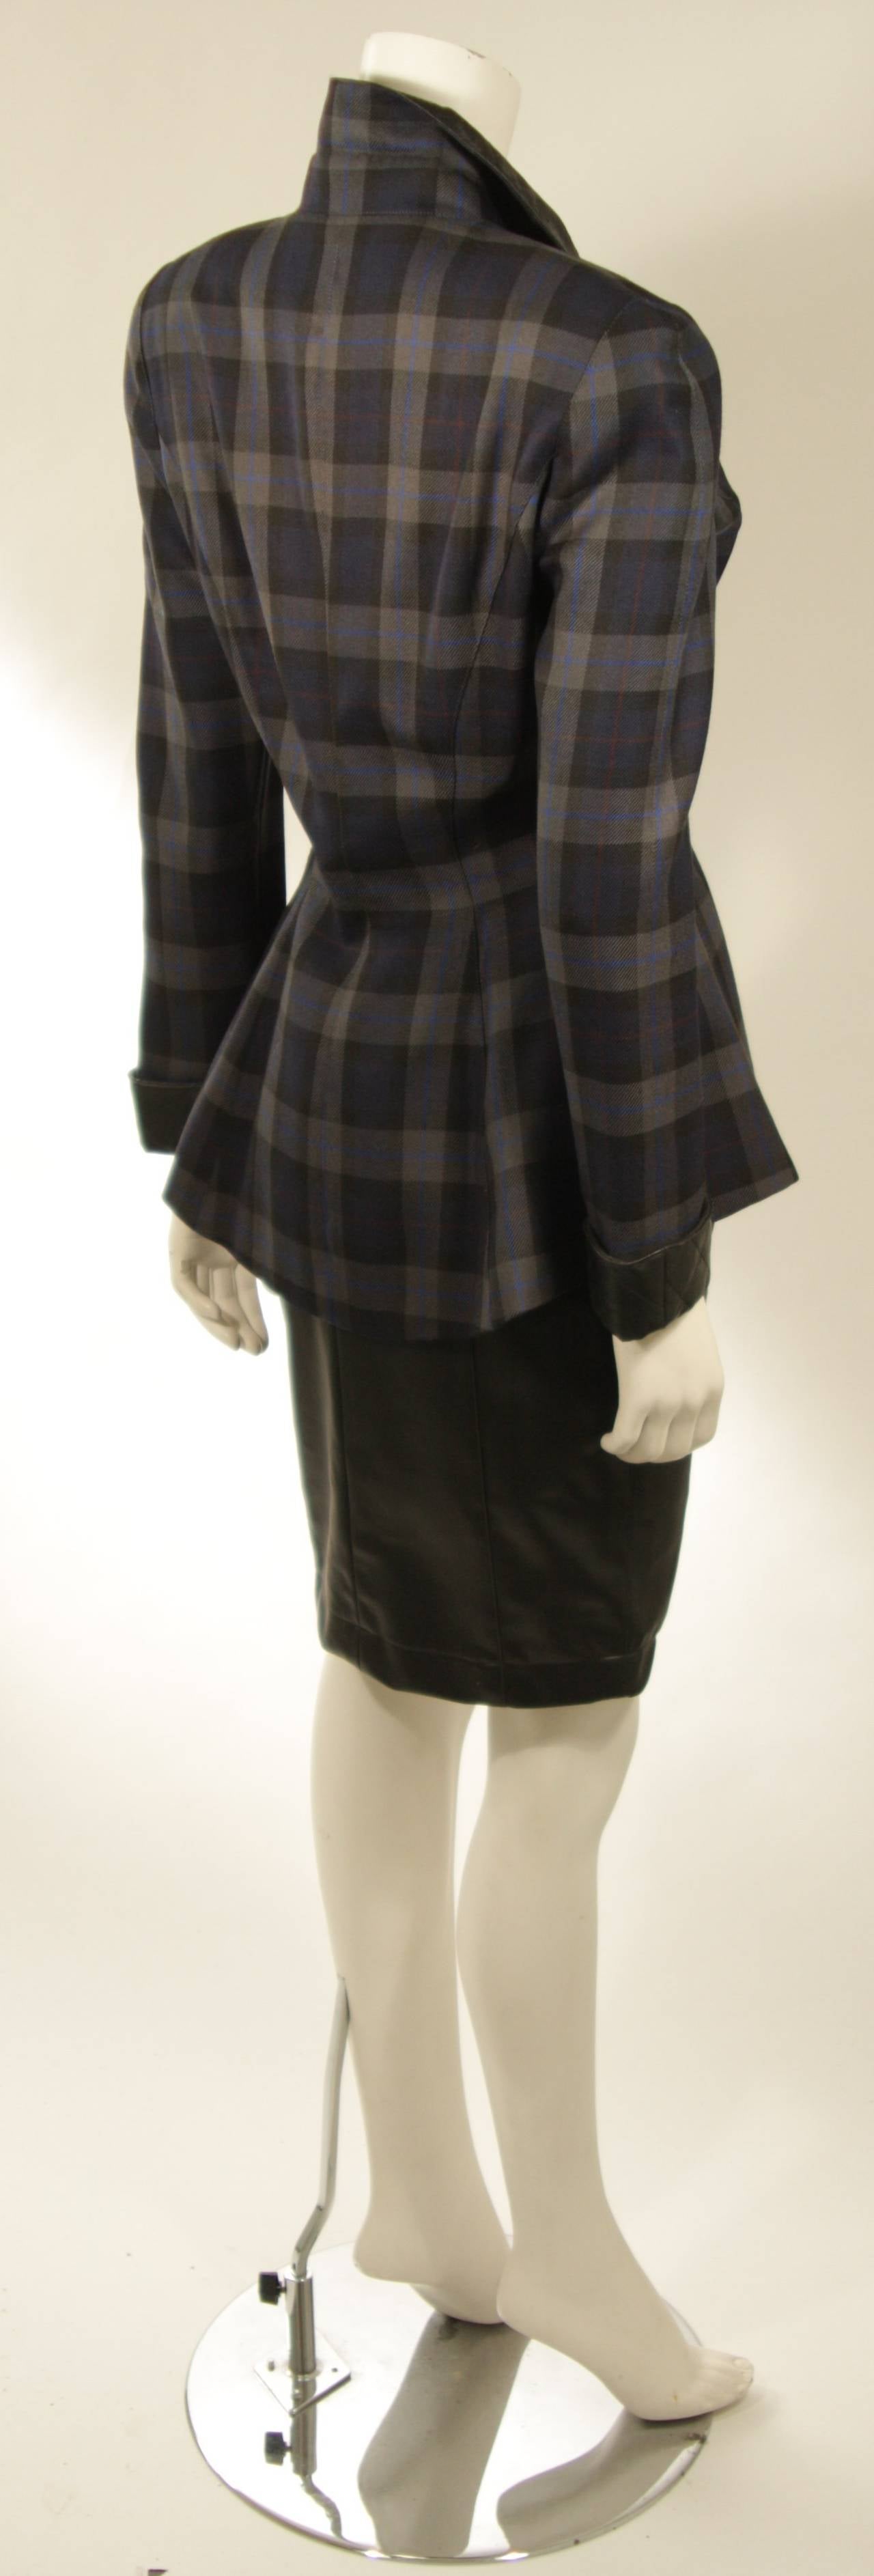 Black Thierry Mugler Navy and Grey Plaid Skirt Suit Size 38 For Sale